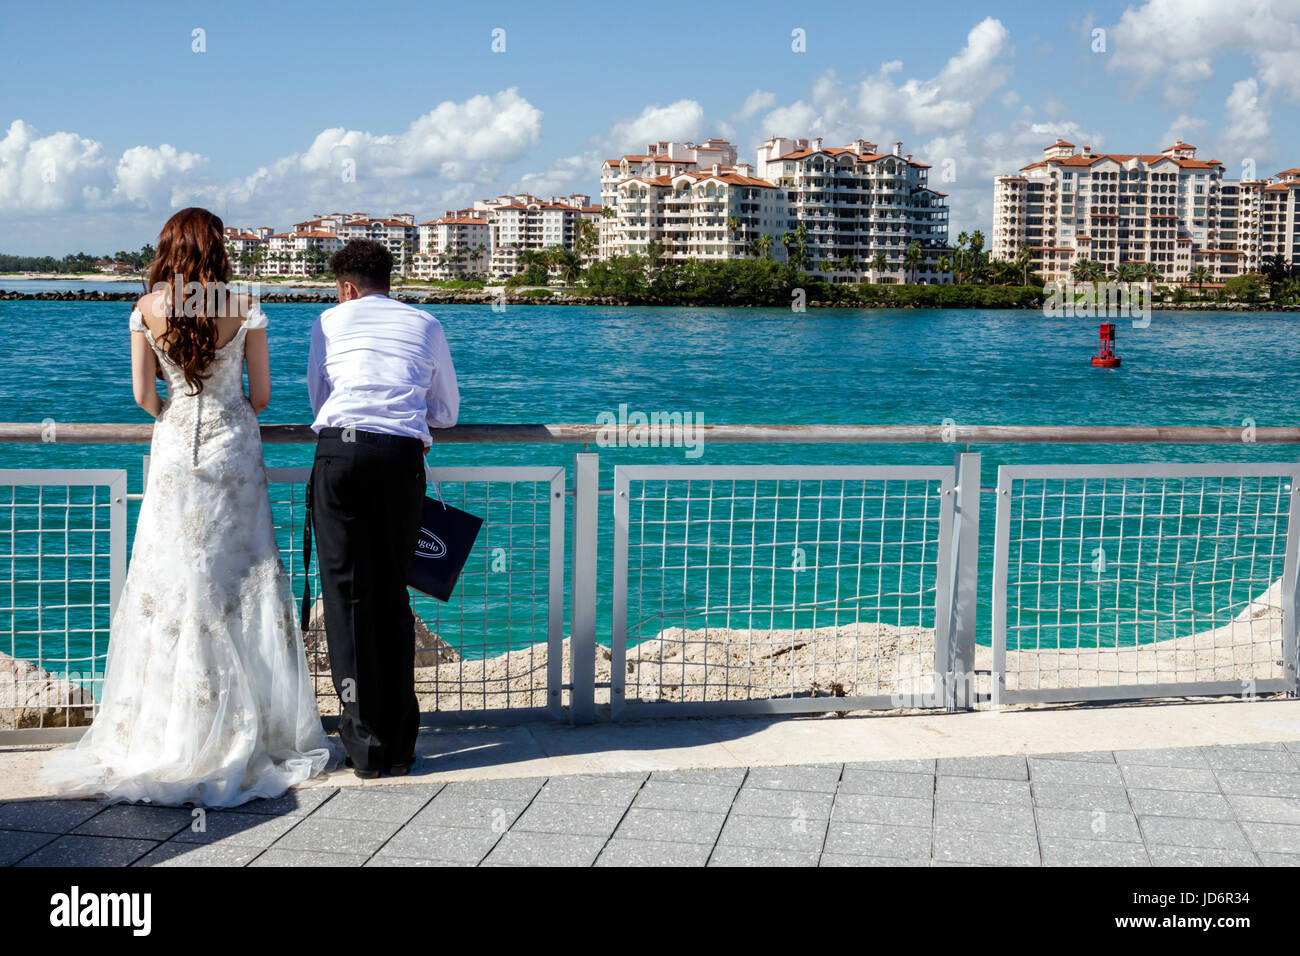 Miami Beach Florida,South Pointe Park,Government Cut,Waterfront,hispanique homme hommes,femme femme femmes,couple,mariage robe,newlyweds,Fisher Island, Banque D'Images